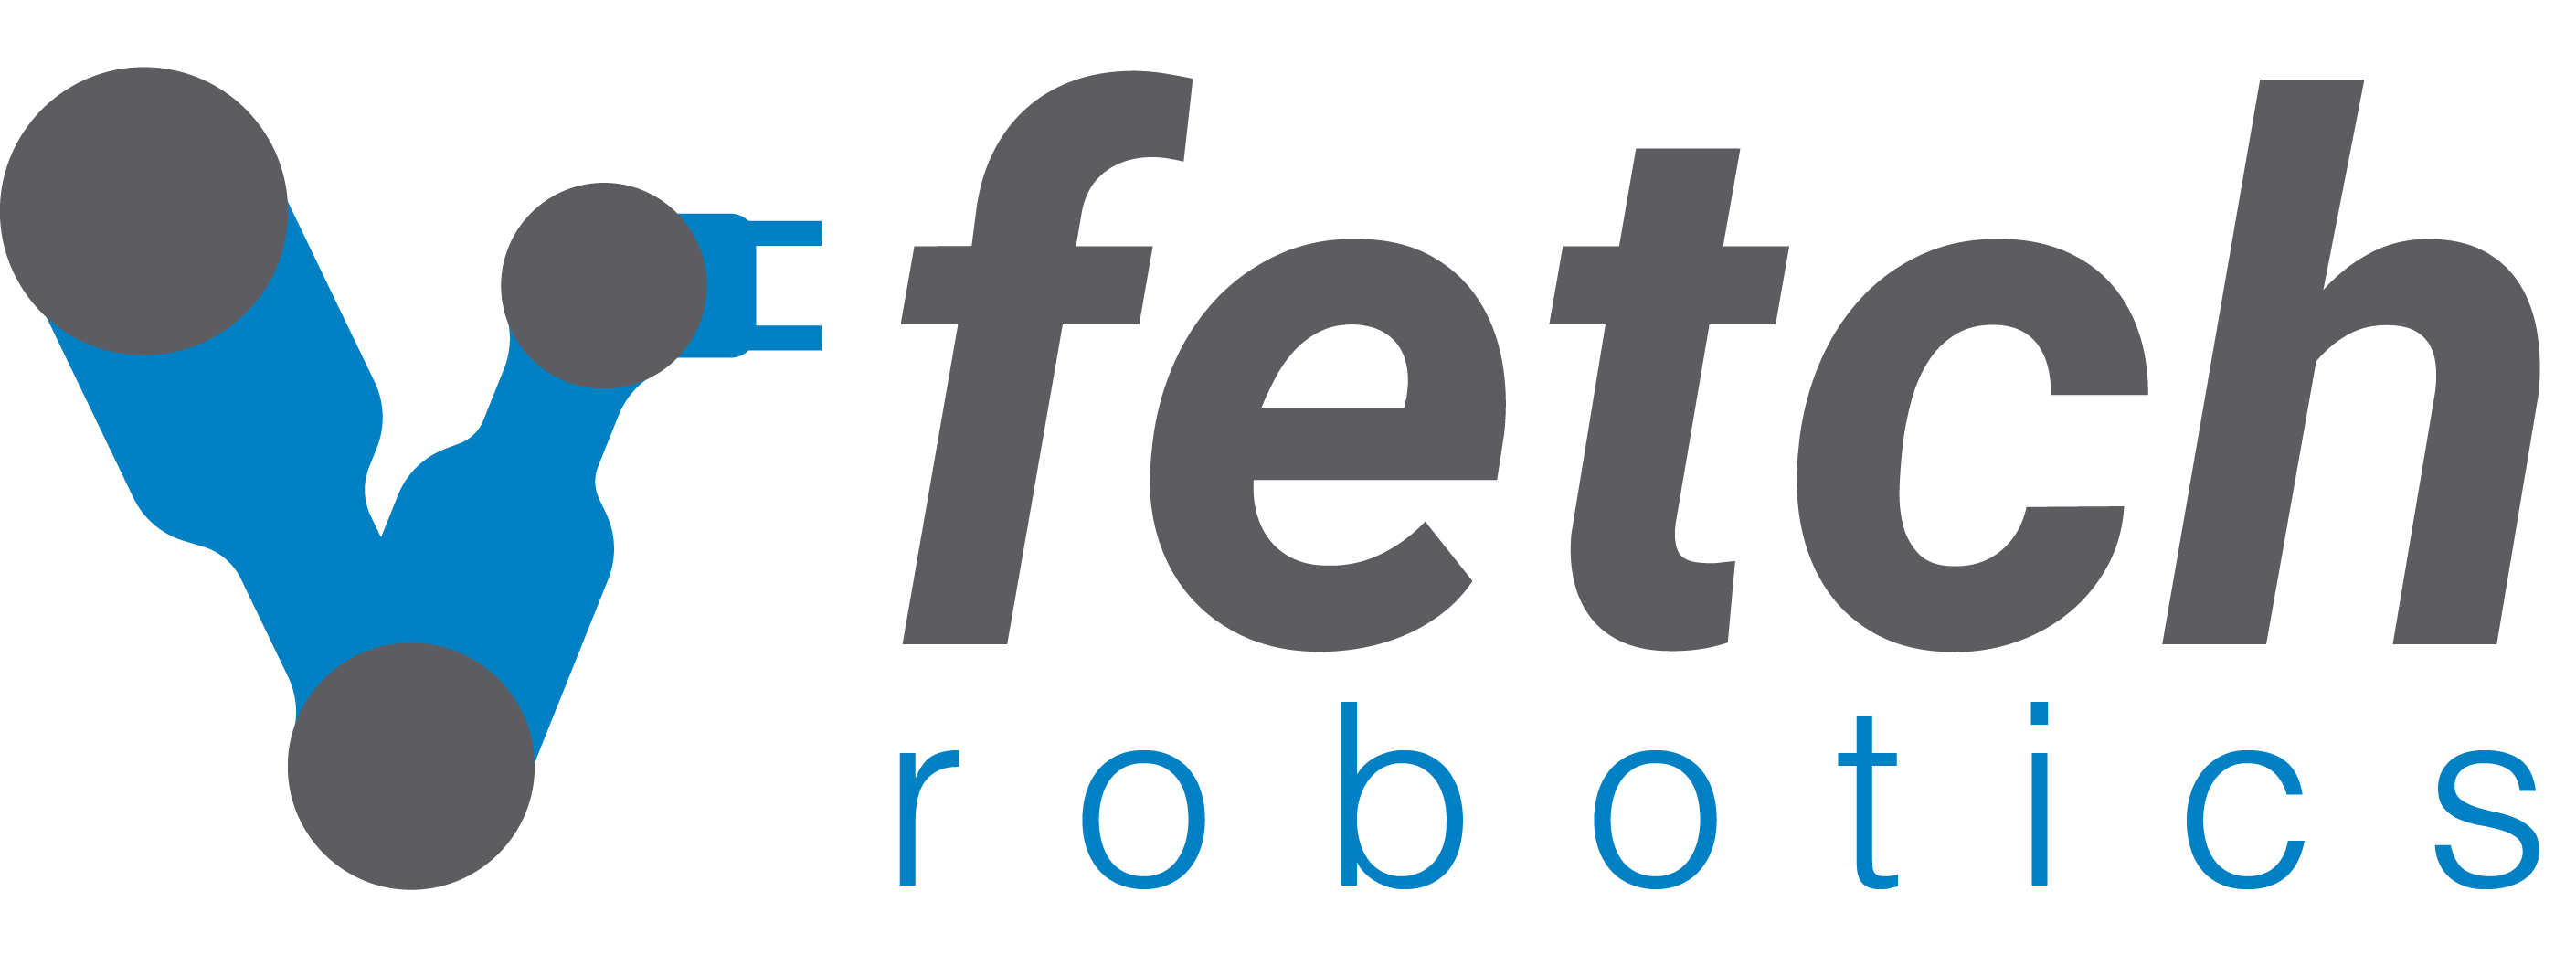 Robot Arm Logo - Robot Hardware Overview — Fetch & Freight Research Edition Indigo ...